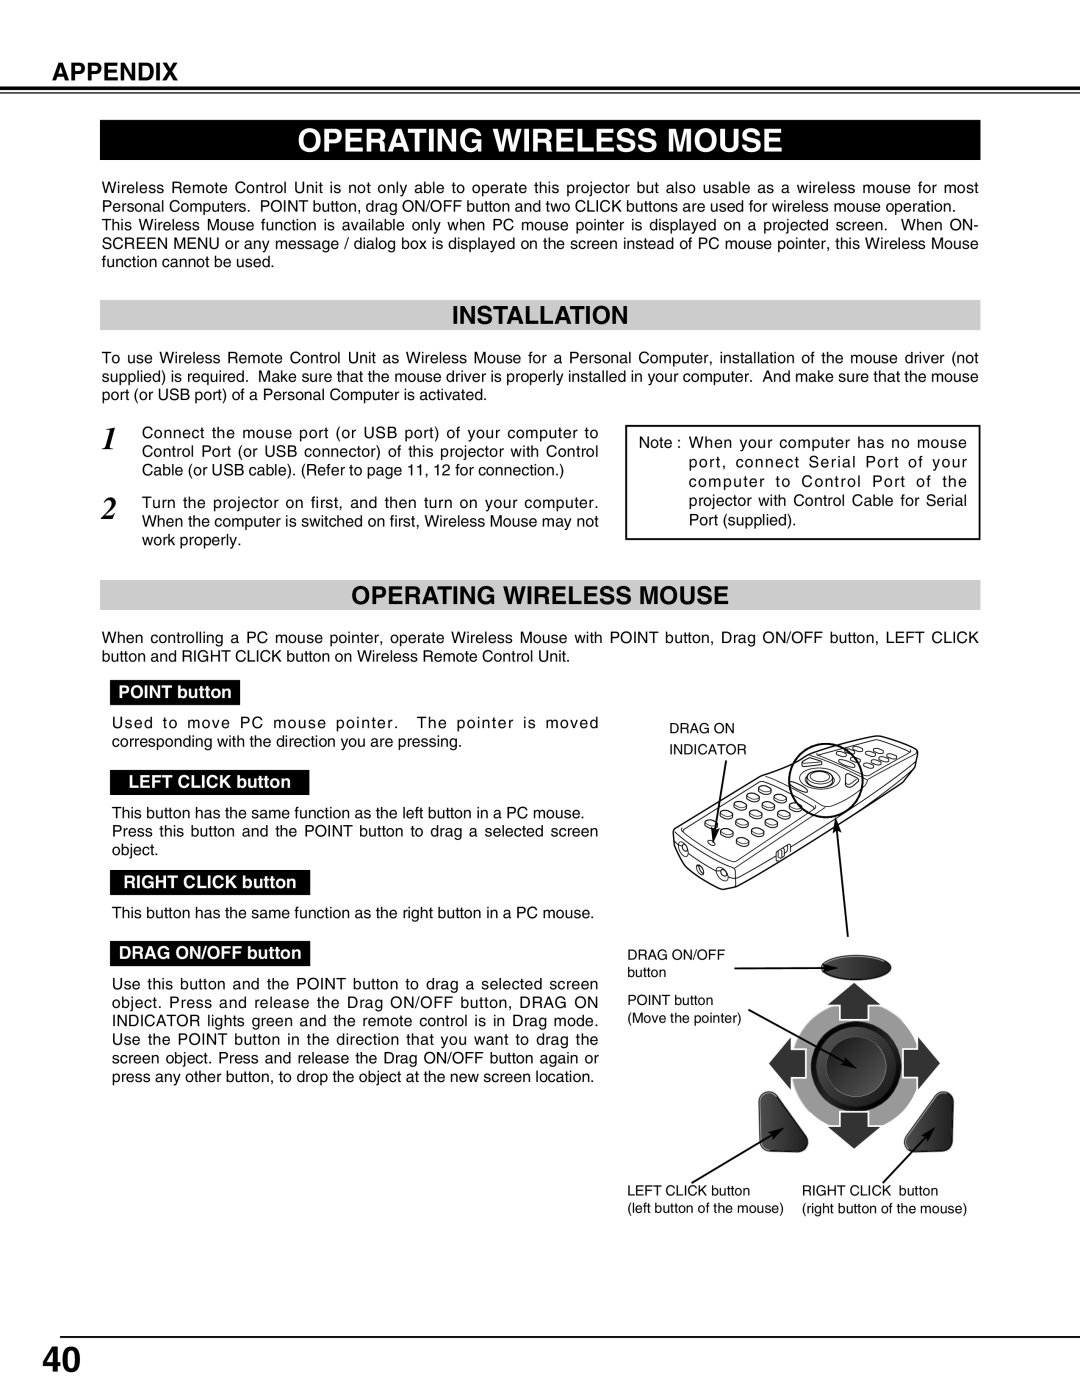 Sanyo PLC-XT10A owner manual Operating Wireless Mouse, Appendix, Installation 